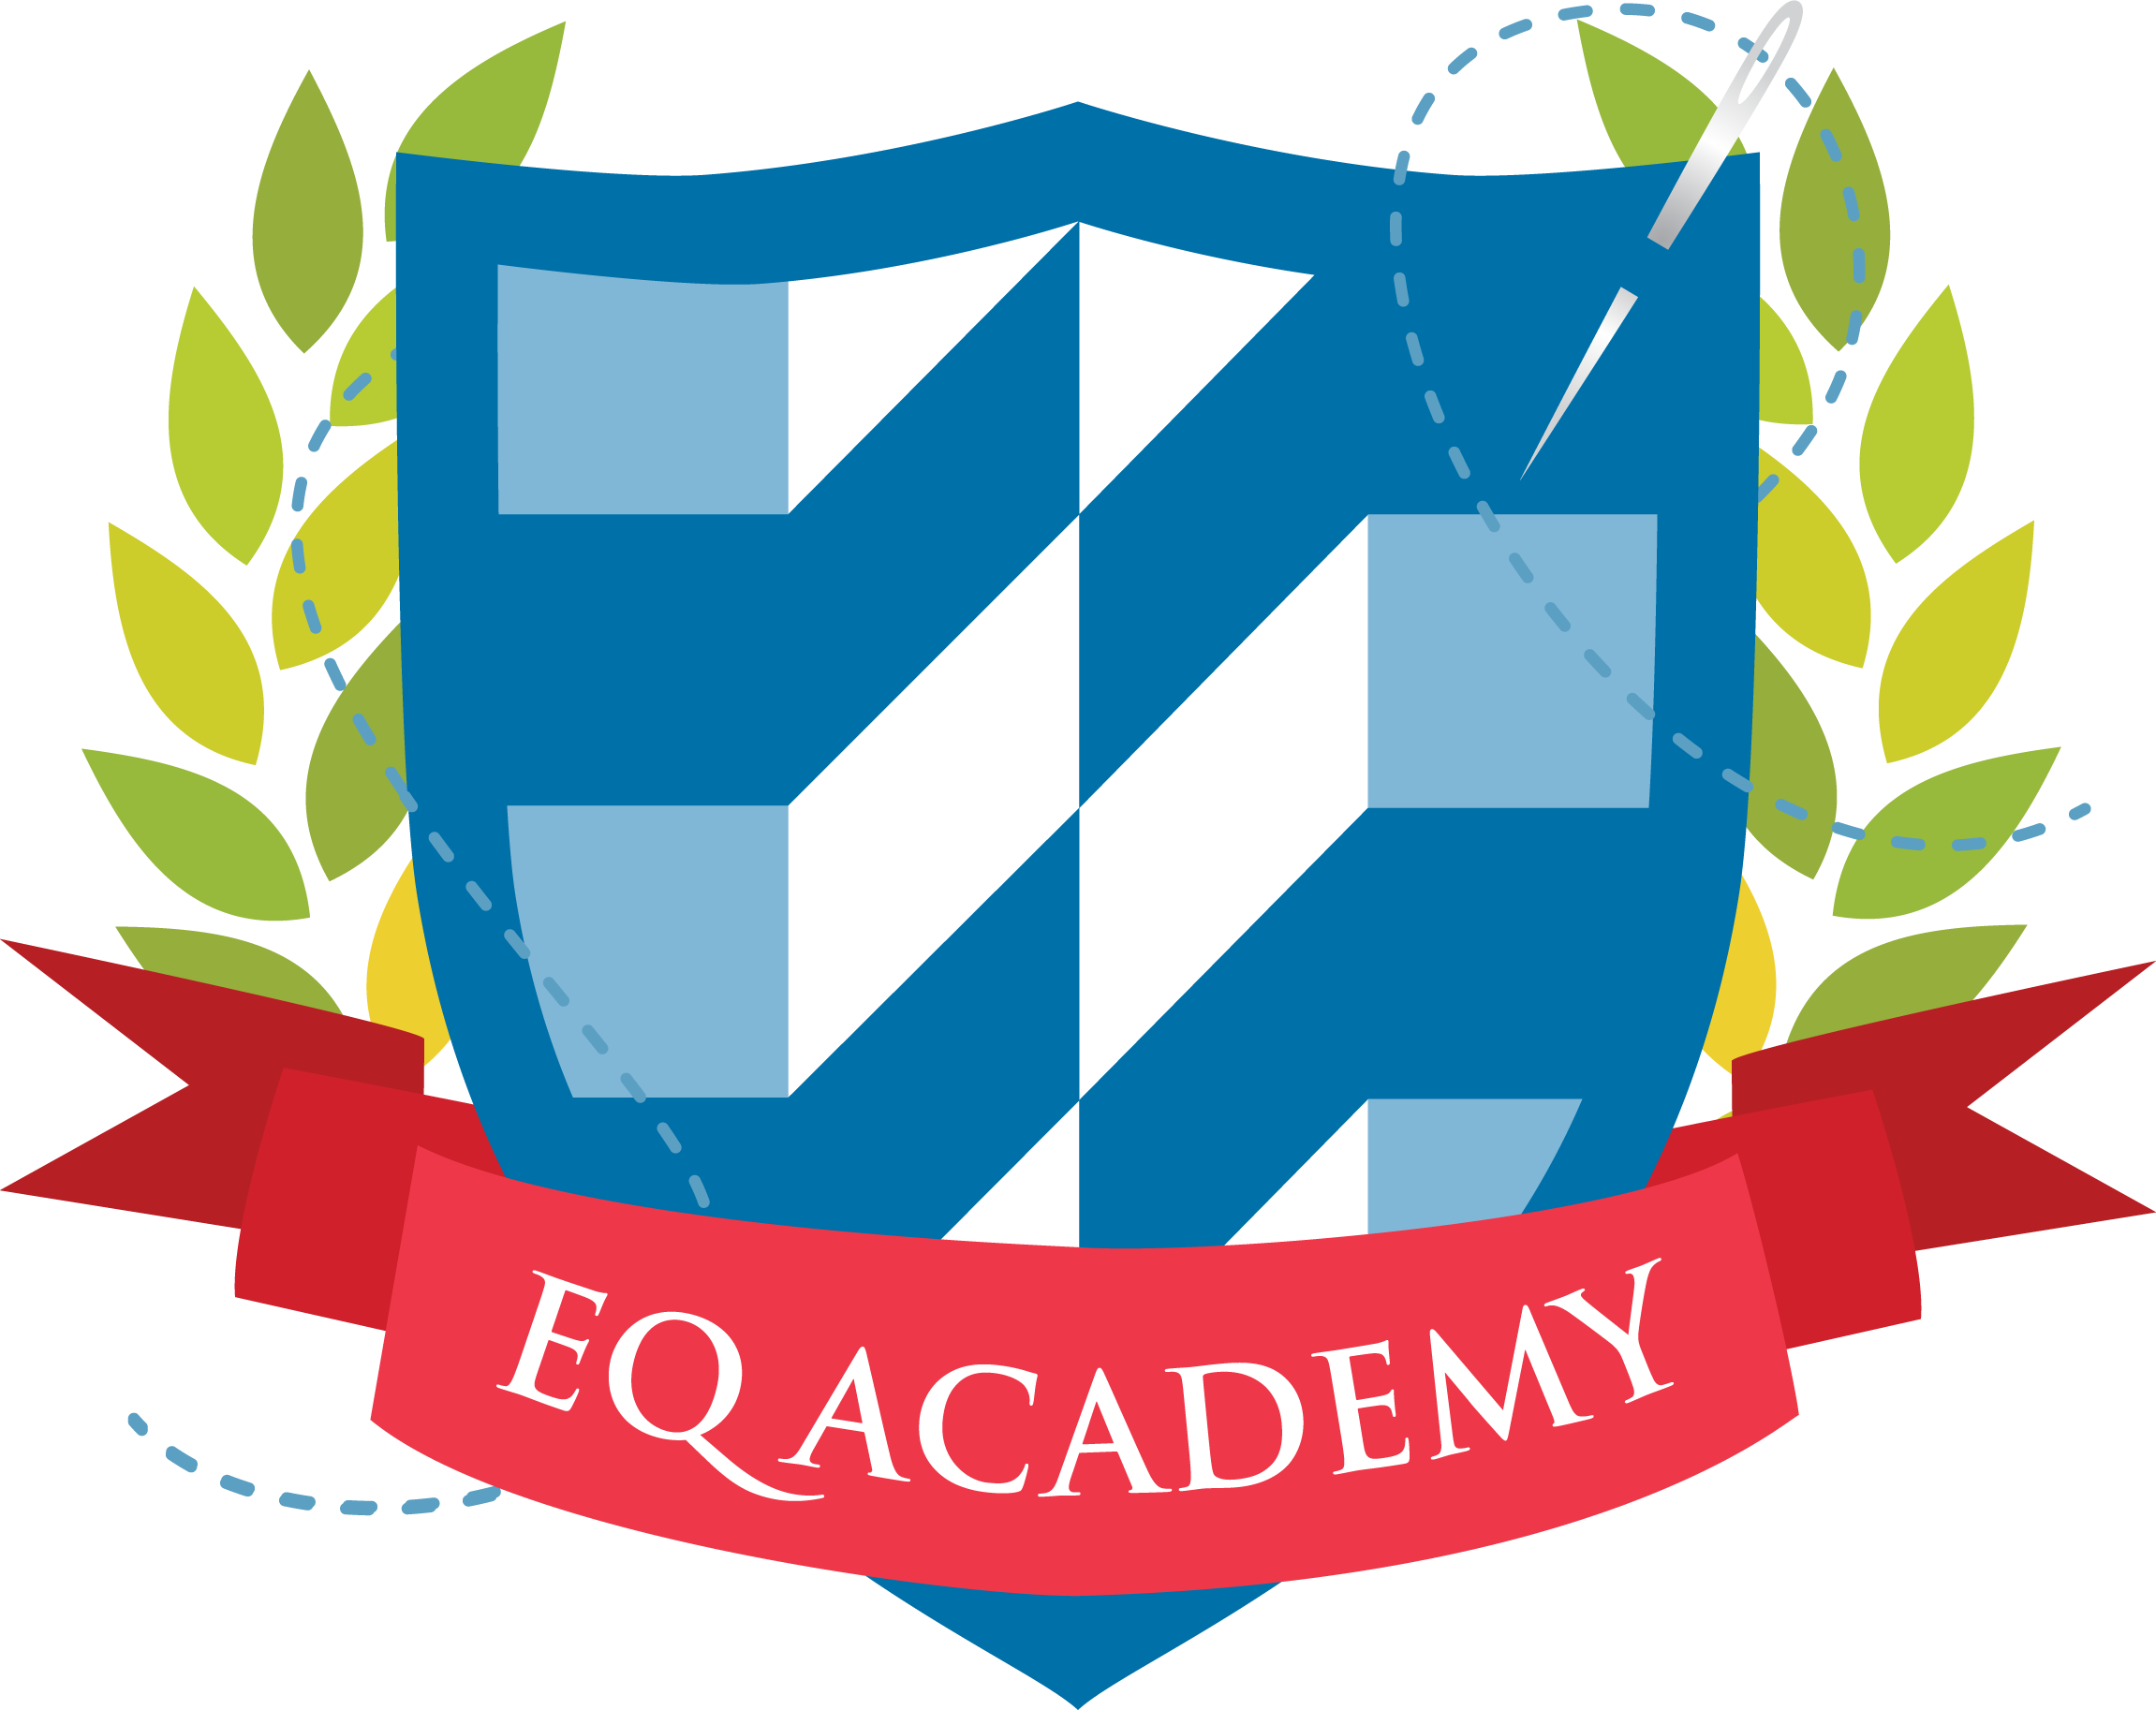 Eqa-logo - Academy Of Motion Picture Arts (2302x1826)